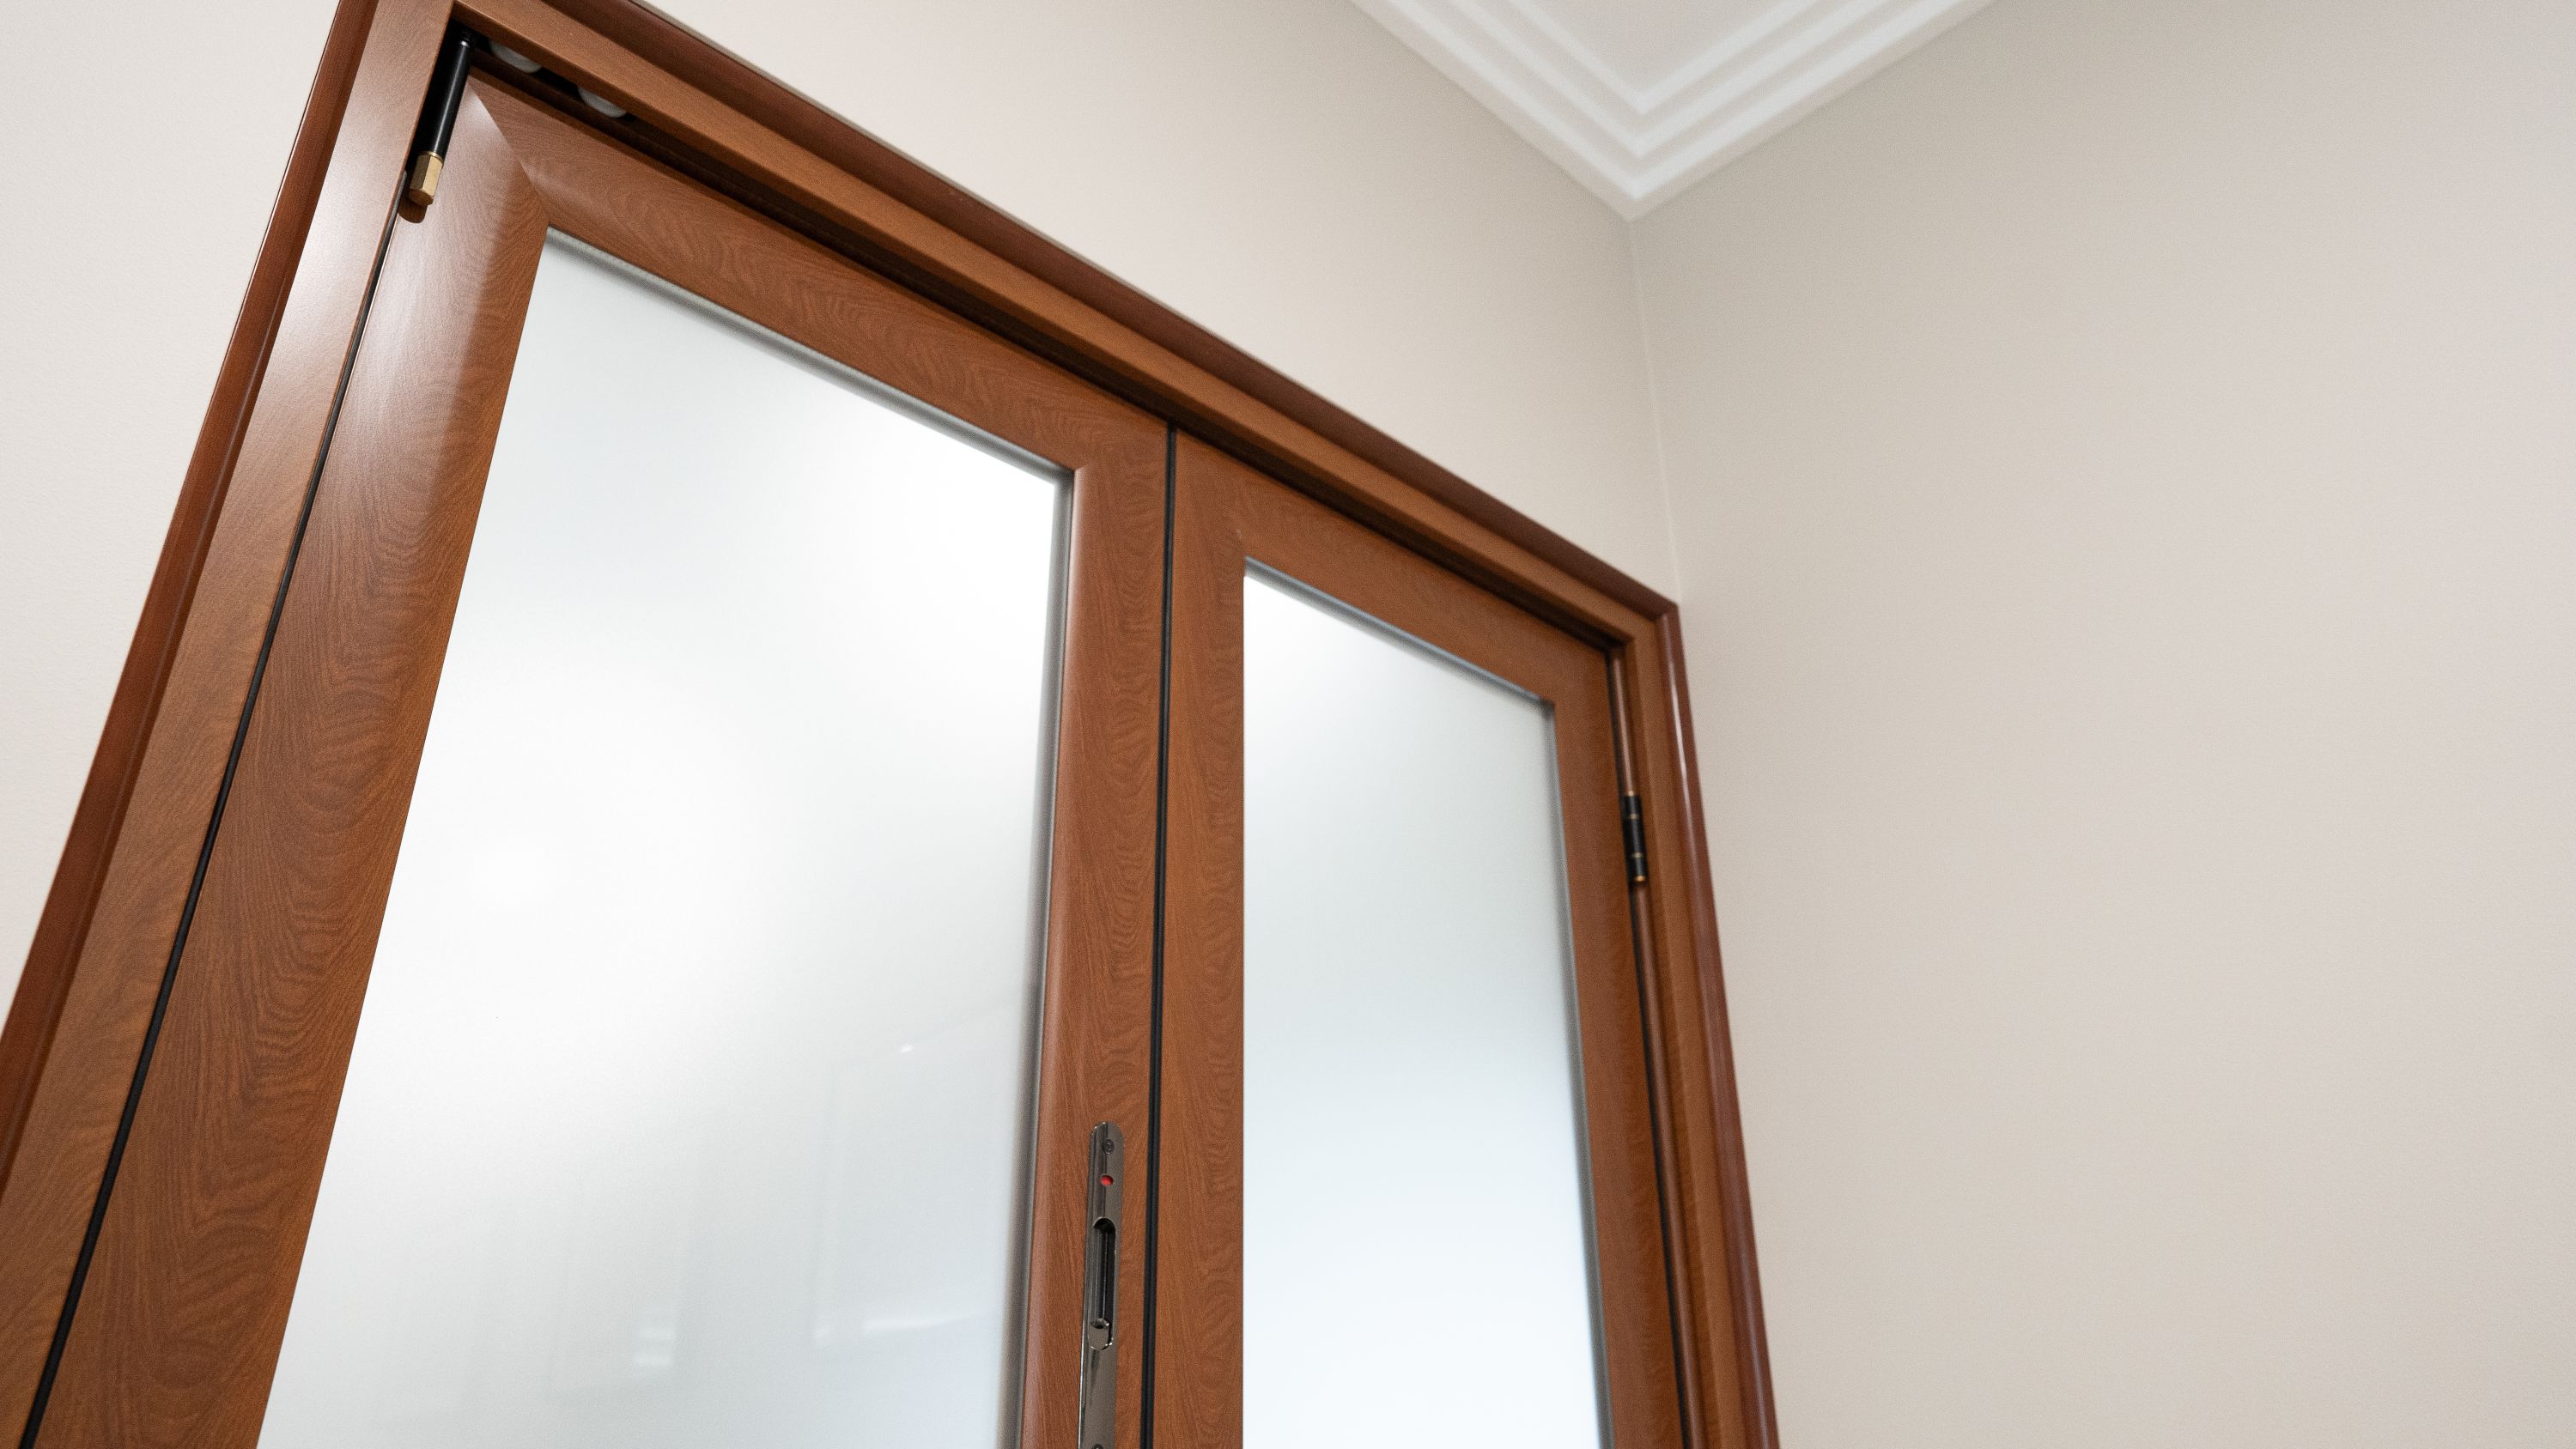 Doors Plus - 2 Panel Bifold Aluminium Zone Living in Woodgrain Finish and Obscure Glass